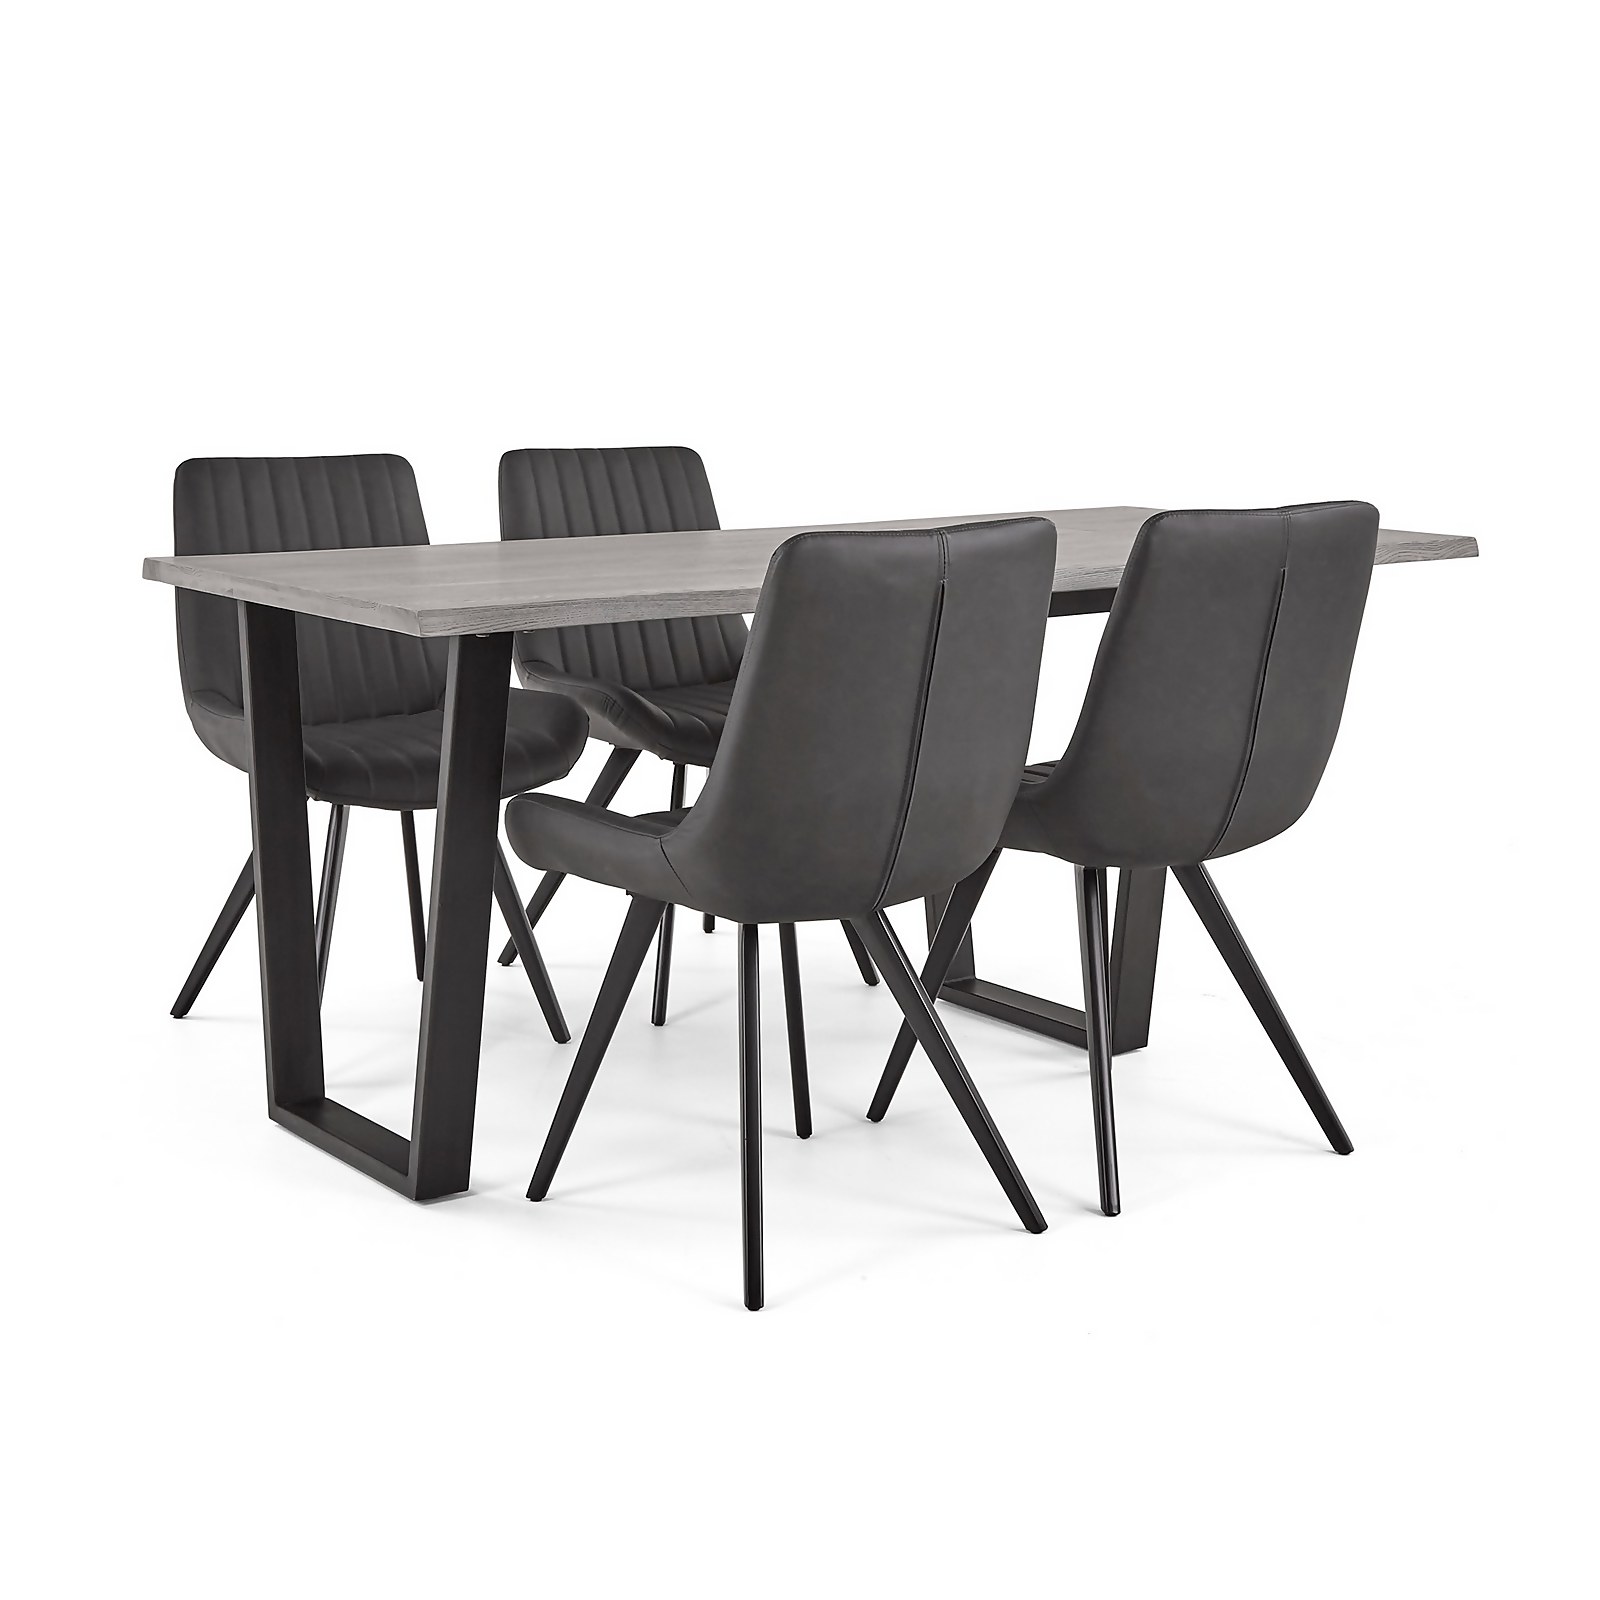 Photo of Dalston Dining Table And 4 Chairs - Charcoal